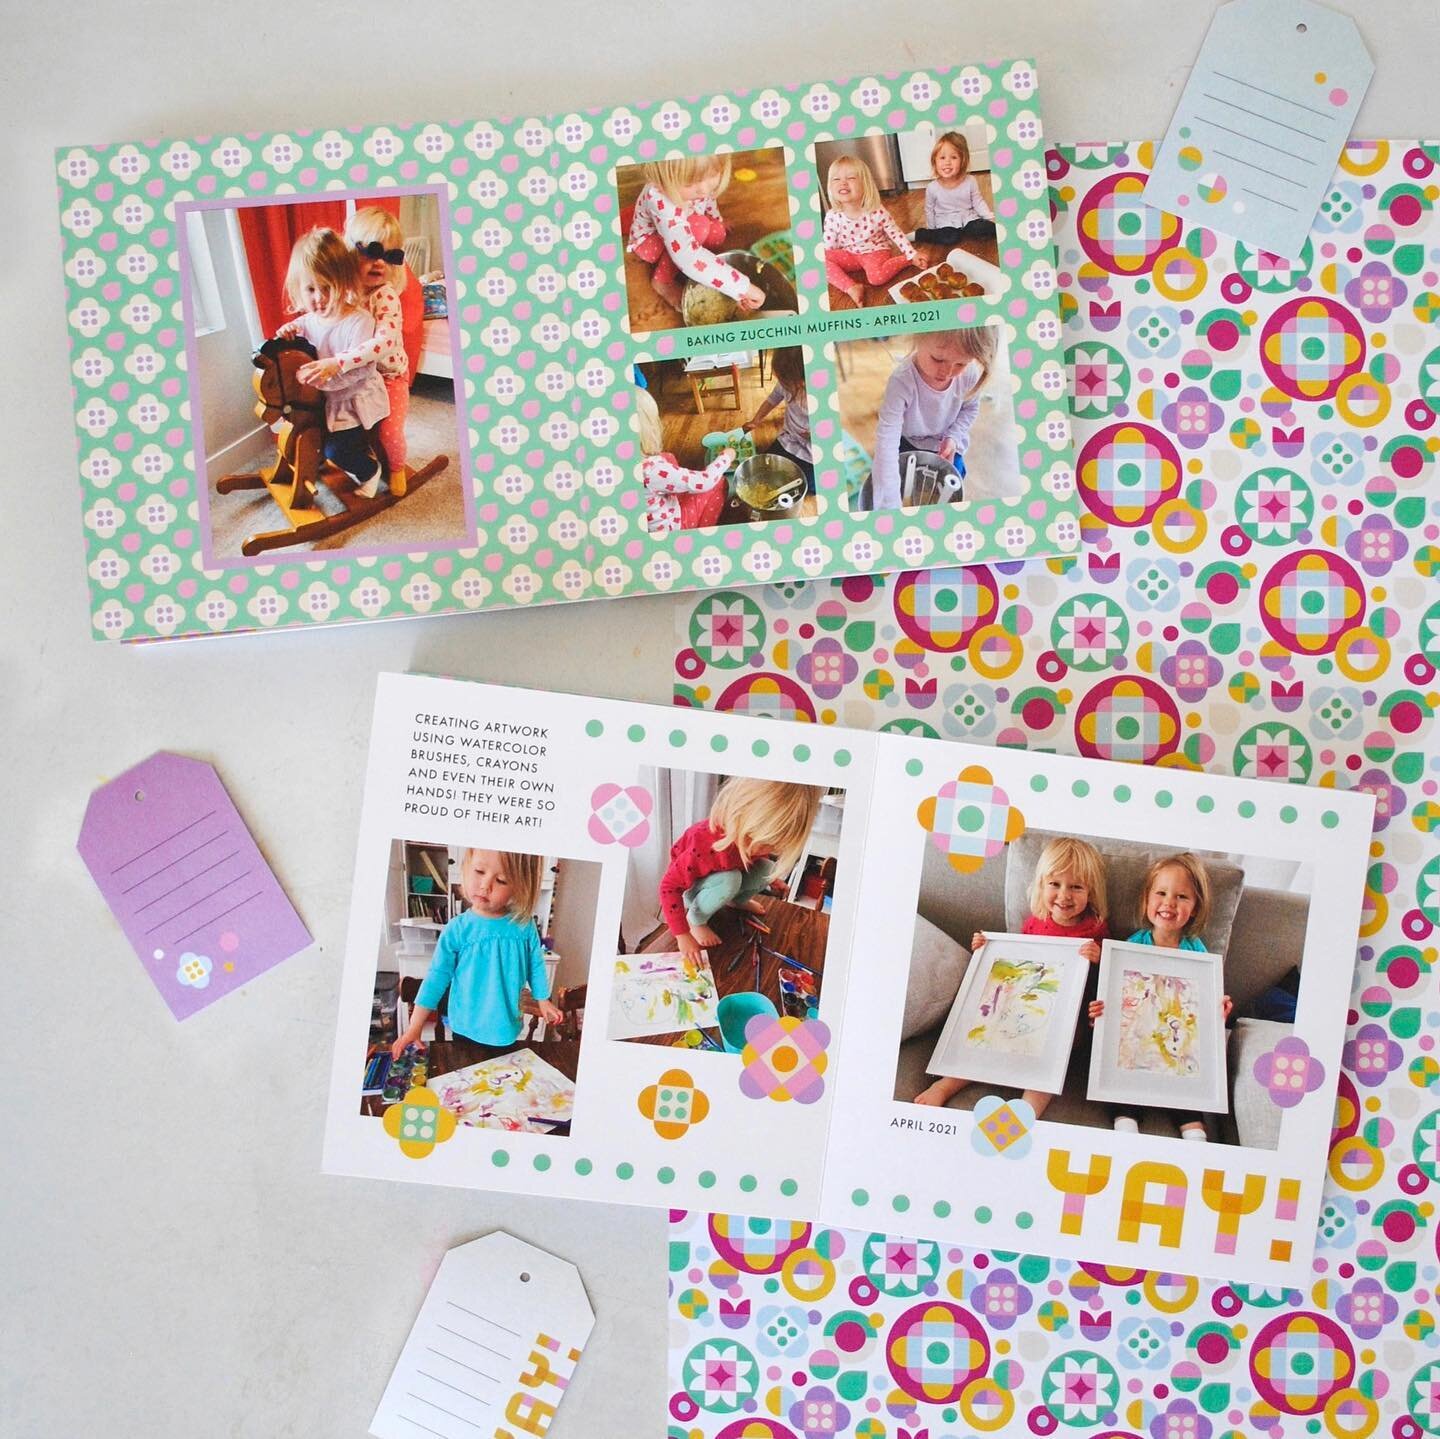 DOTTY MAY Photo Book - I created this photo book two years ago incorporating the patterns I designed based on my @lego DOTS makes. I made the book for my daughter June and her good friend Ellie. The book was a fun design challenge, finding ways to us